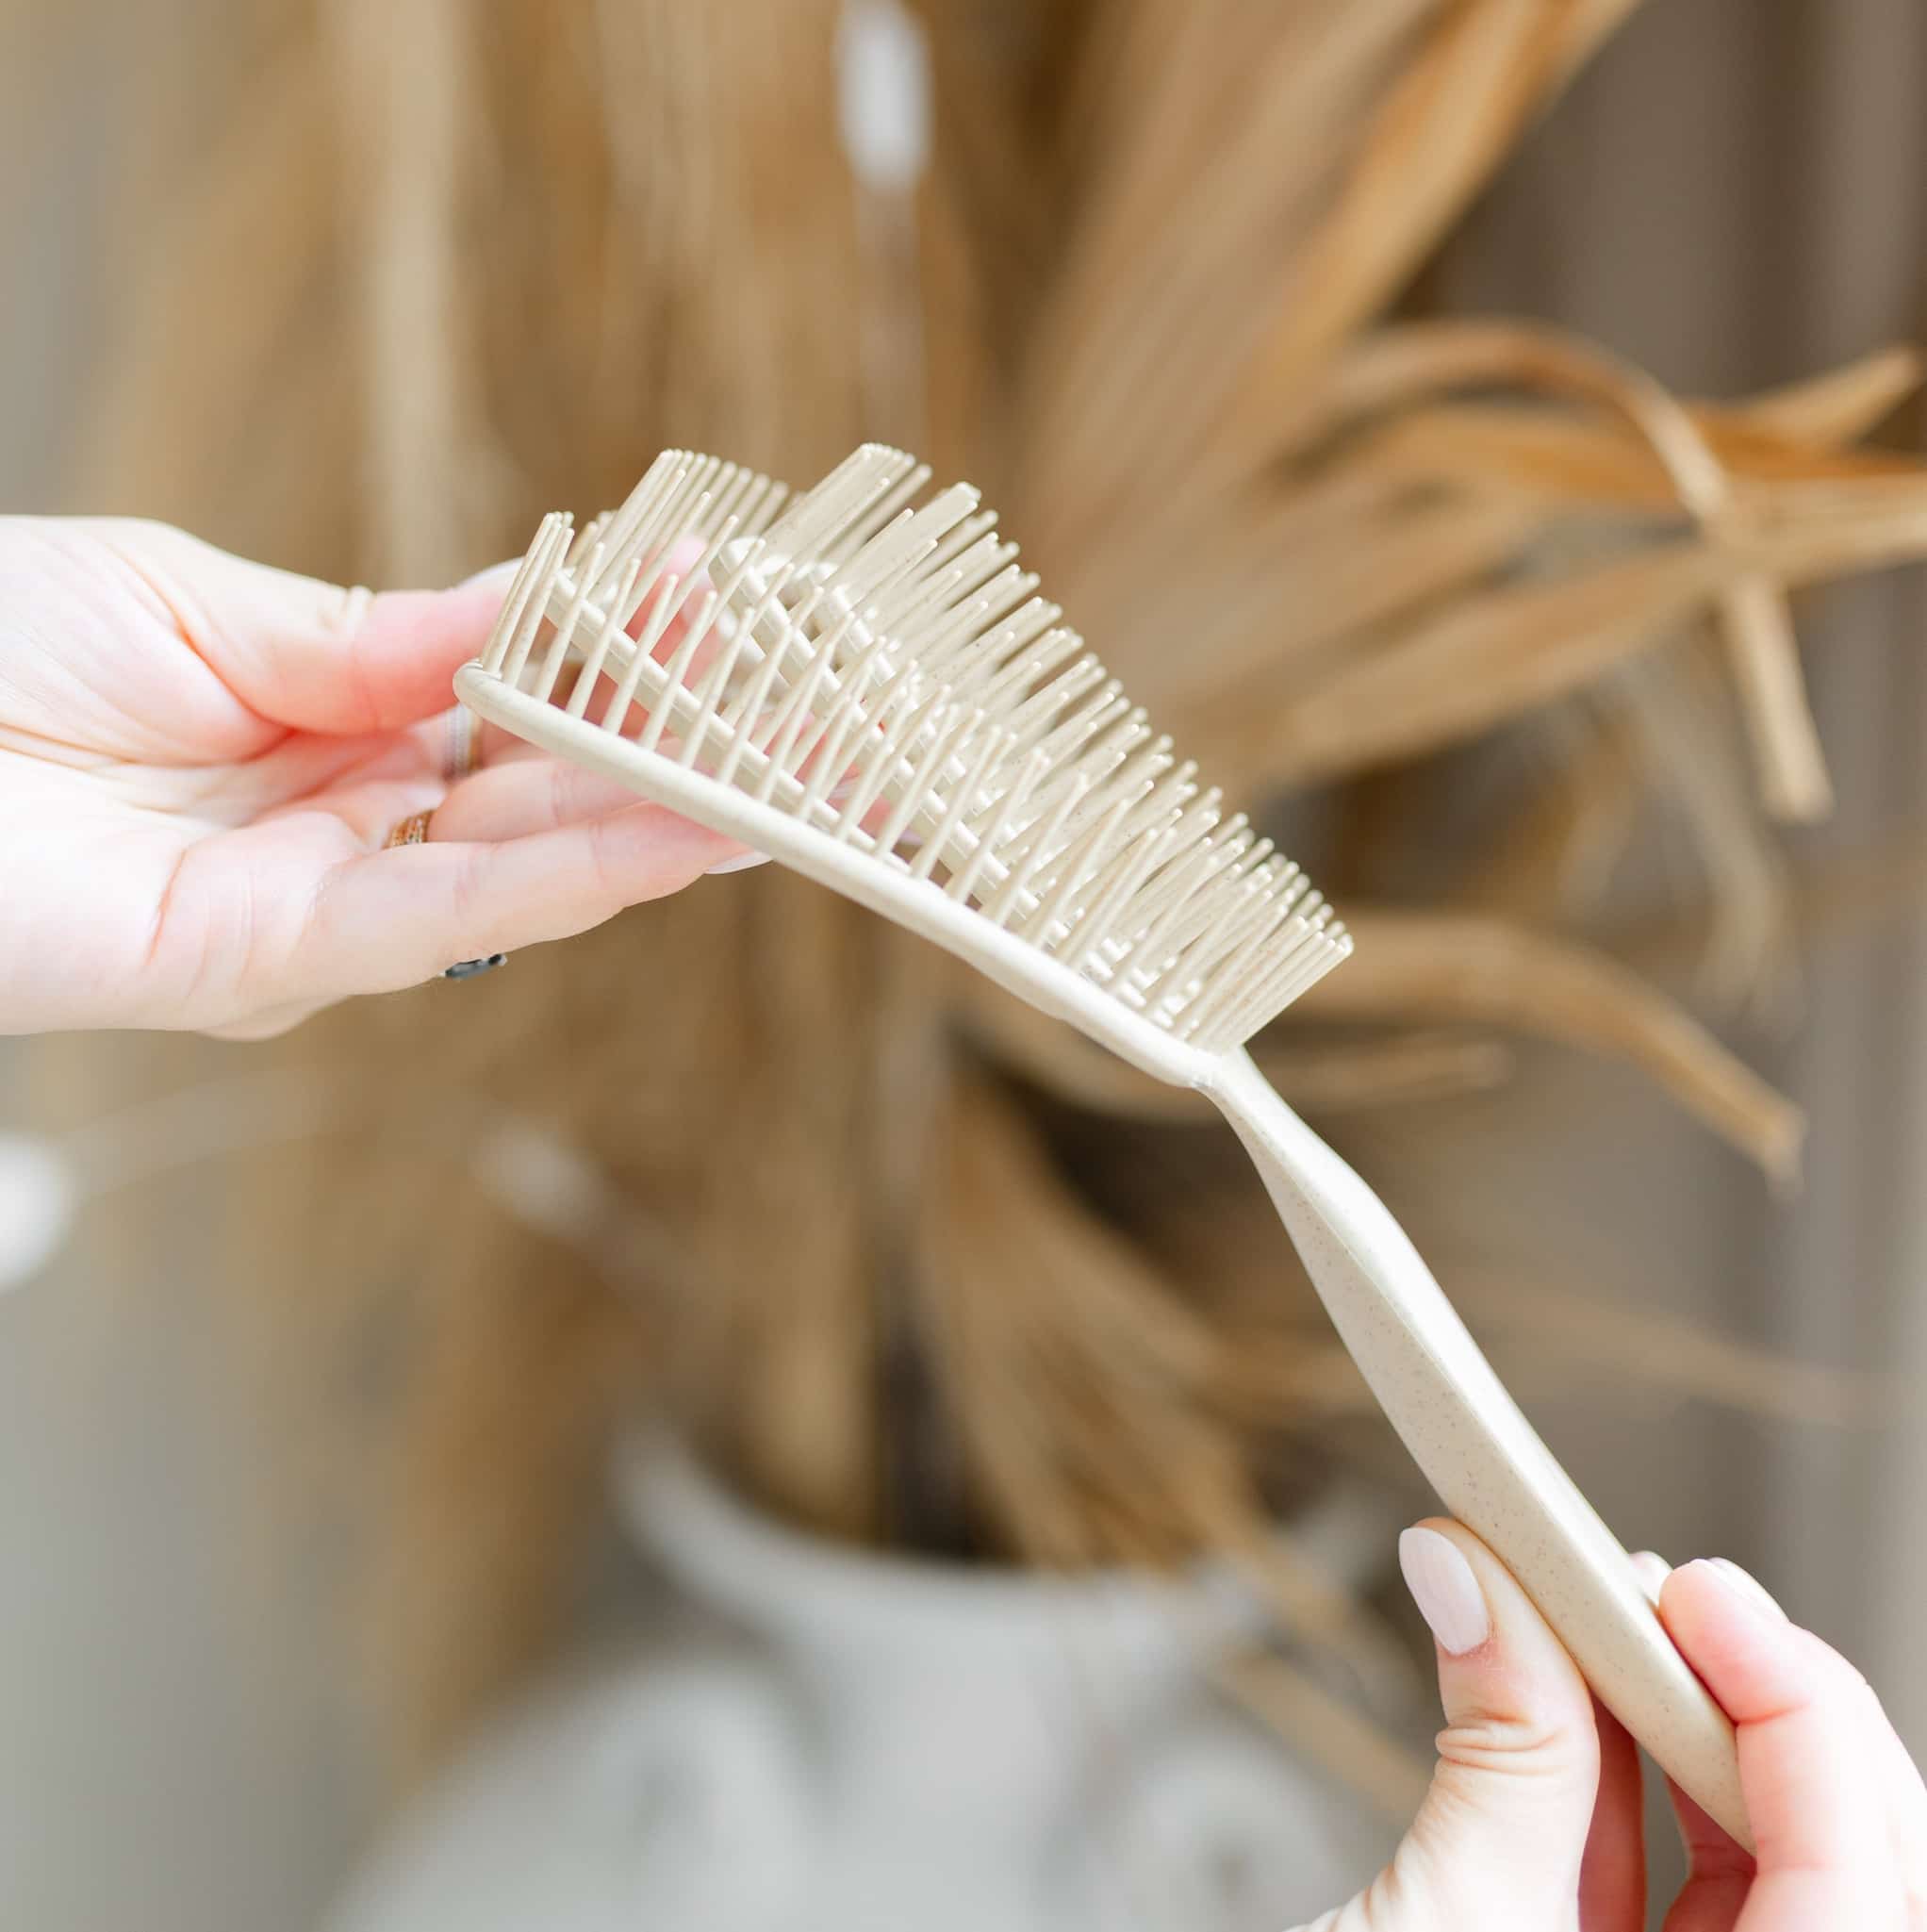 Unique 5-way flex design of TO112 Detangling Brush for pain-free detangling displayed in woman's hands. Made of heat-resistant, biodegradable wheat straw plastic.